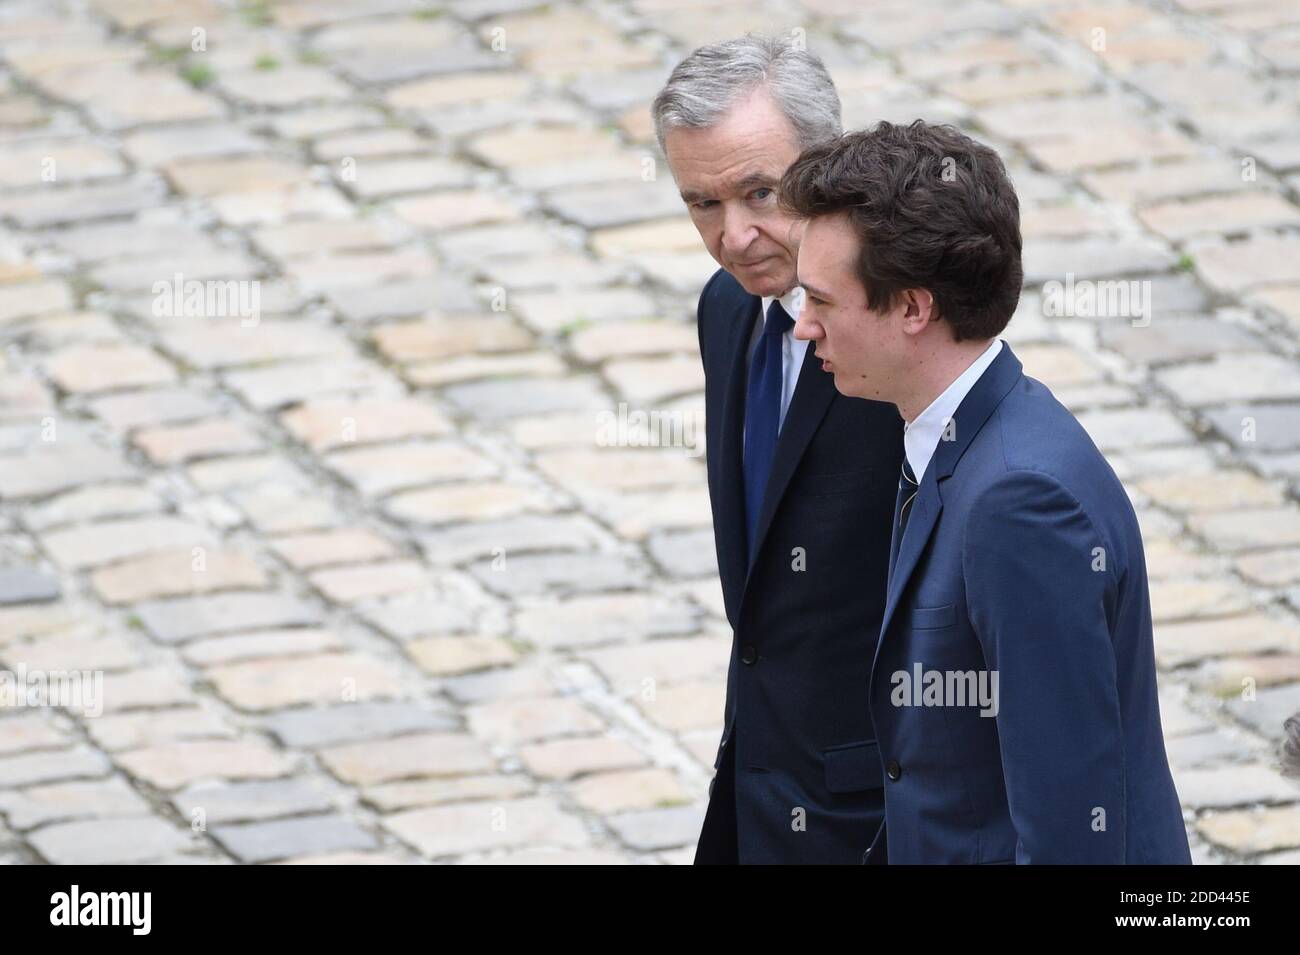 LVMH CEO Bernard Arnault and his son Frederic attending the funeral  ceremony for late French industrialist-turned-politician Serge Dassault,  the Hotel des Invalides courtyard on May 31, 2018 in Paris, France, who died